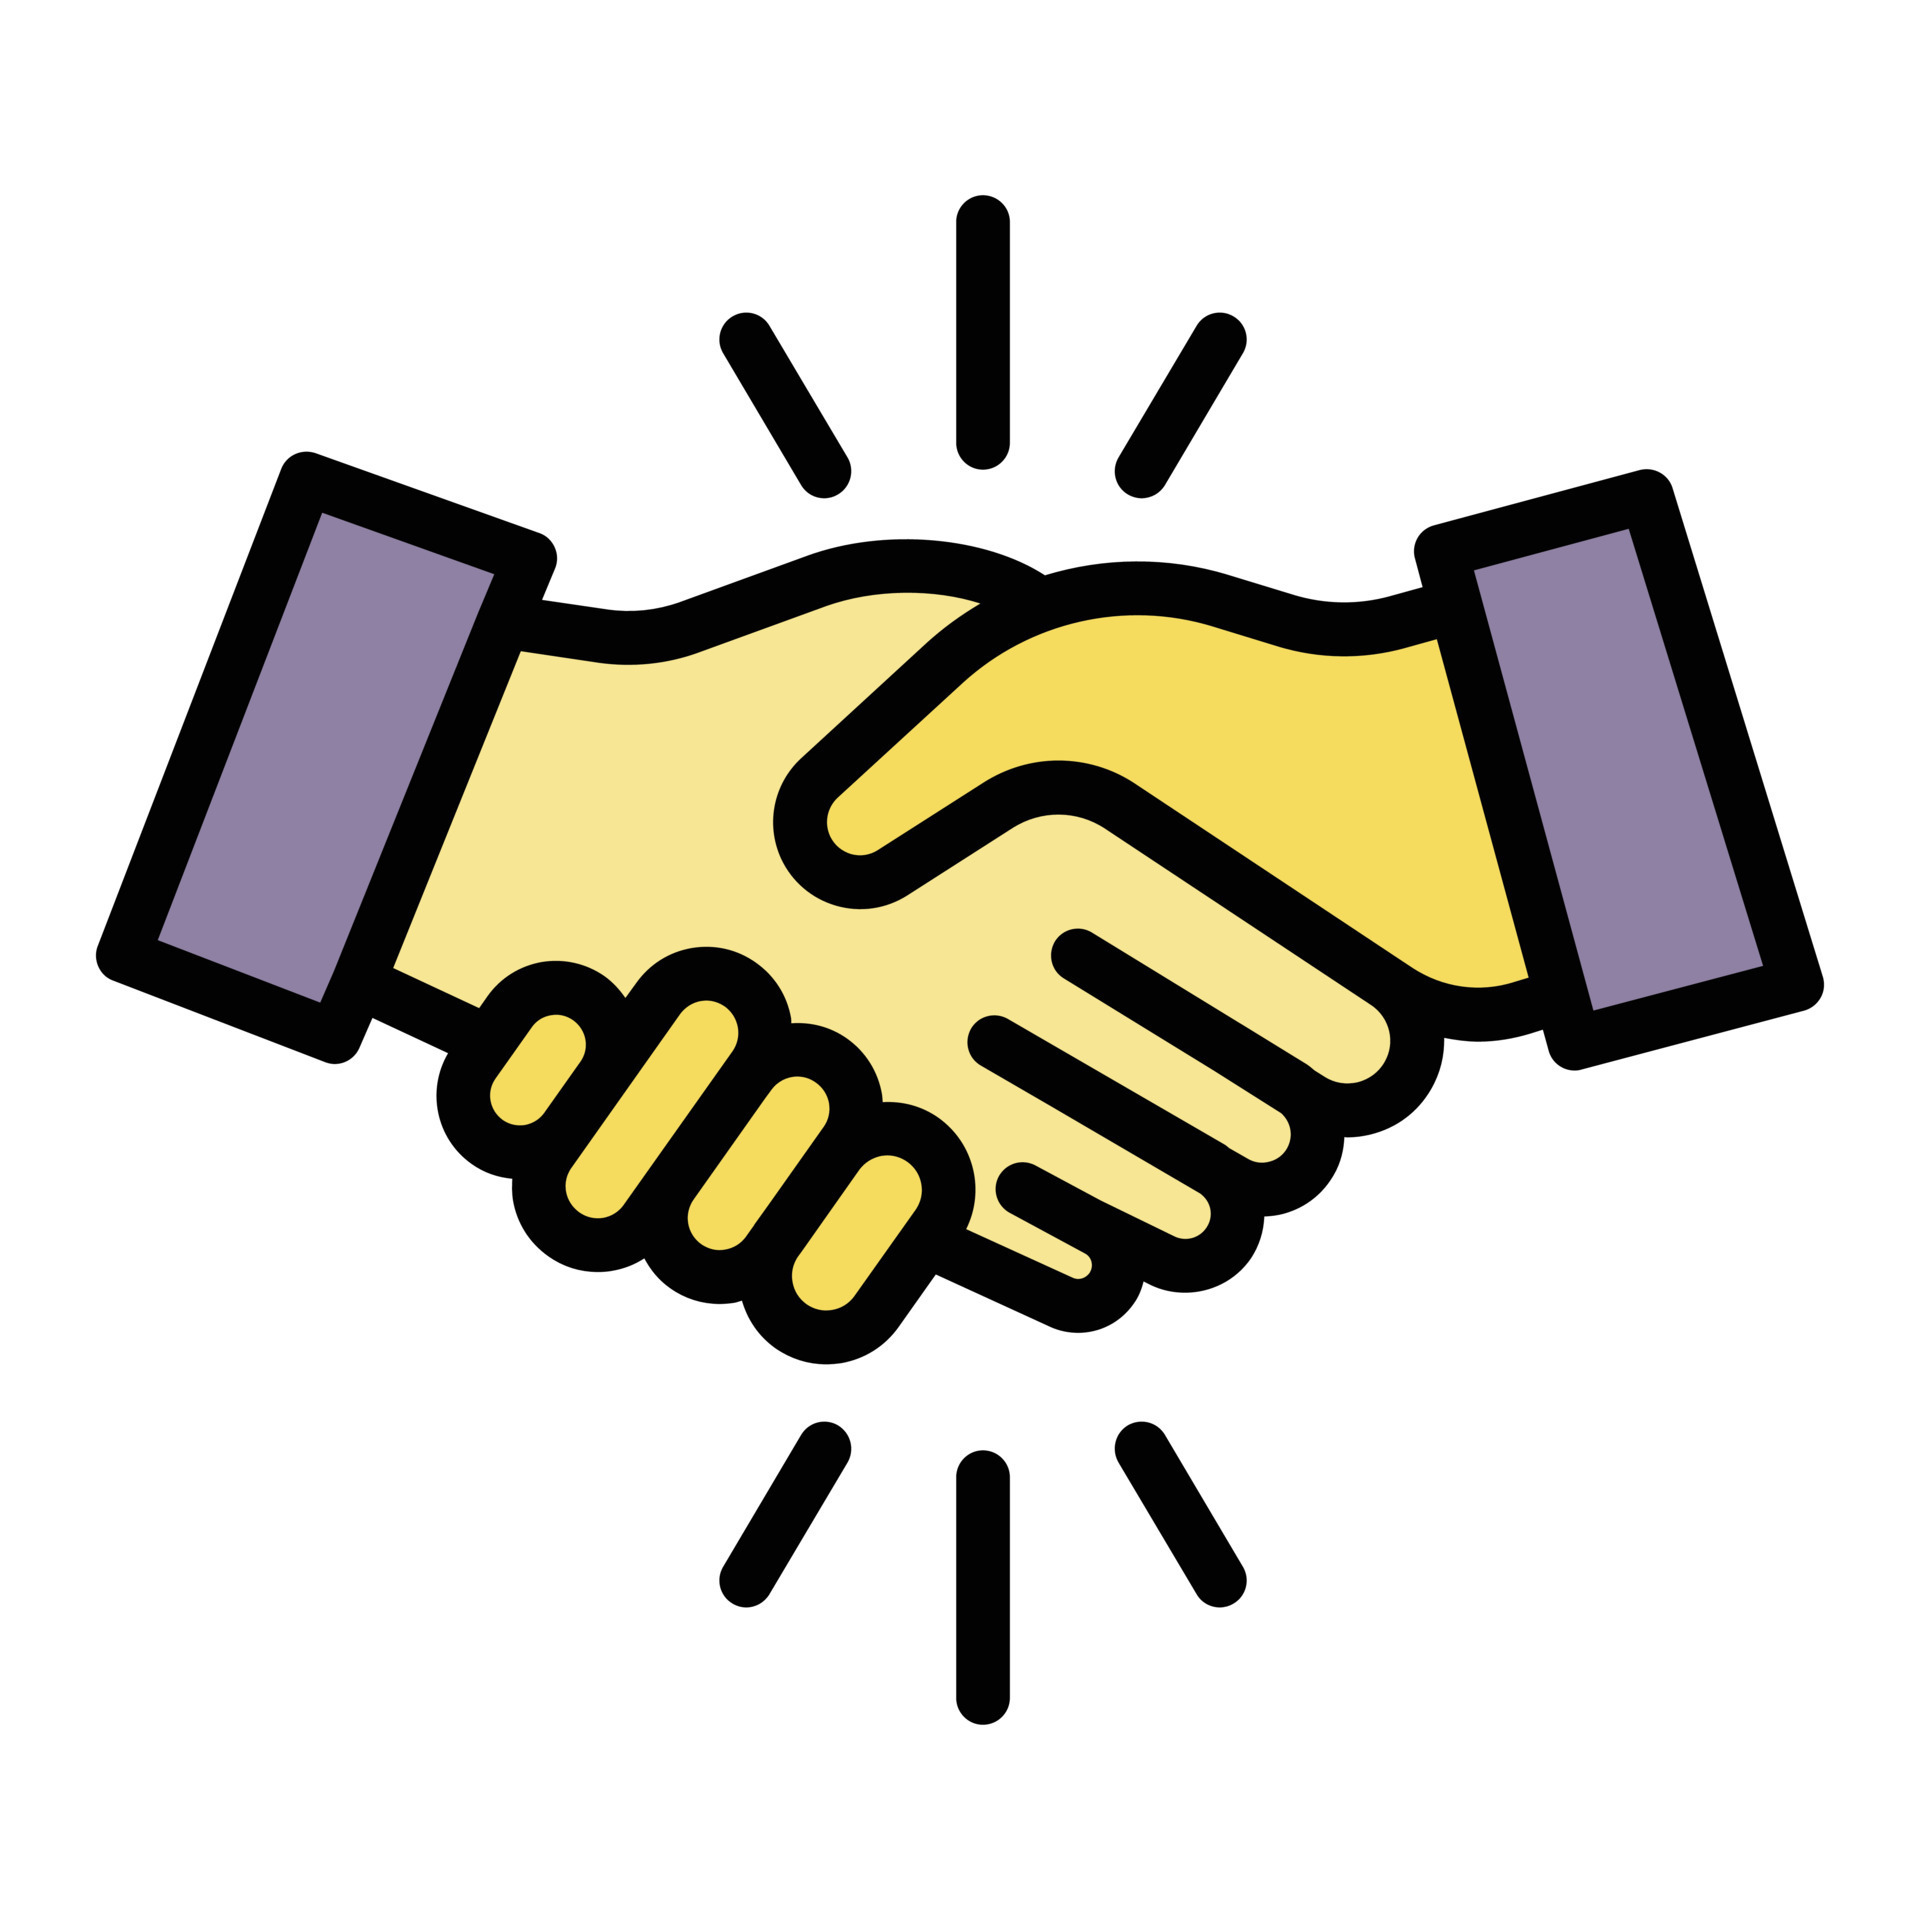 Handshake Icon - Download in Colored Outline Style